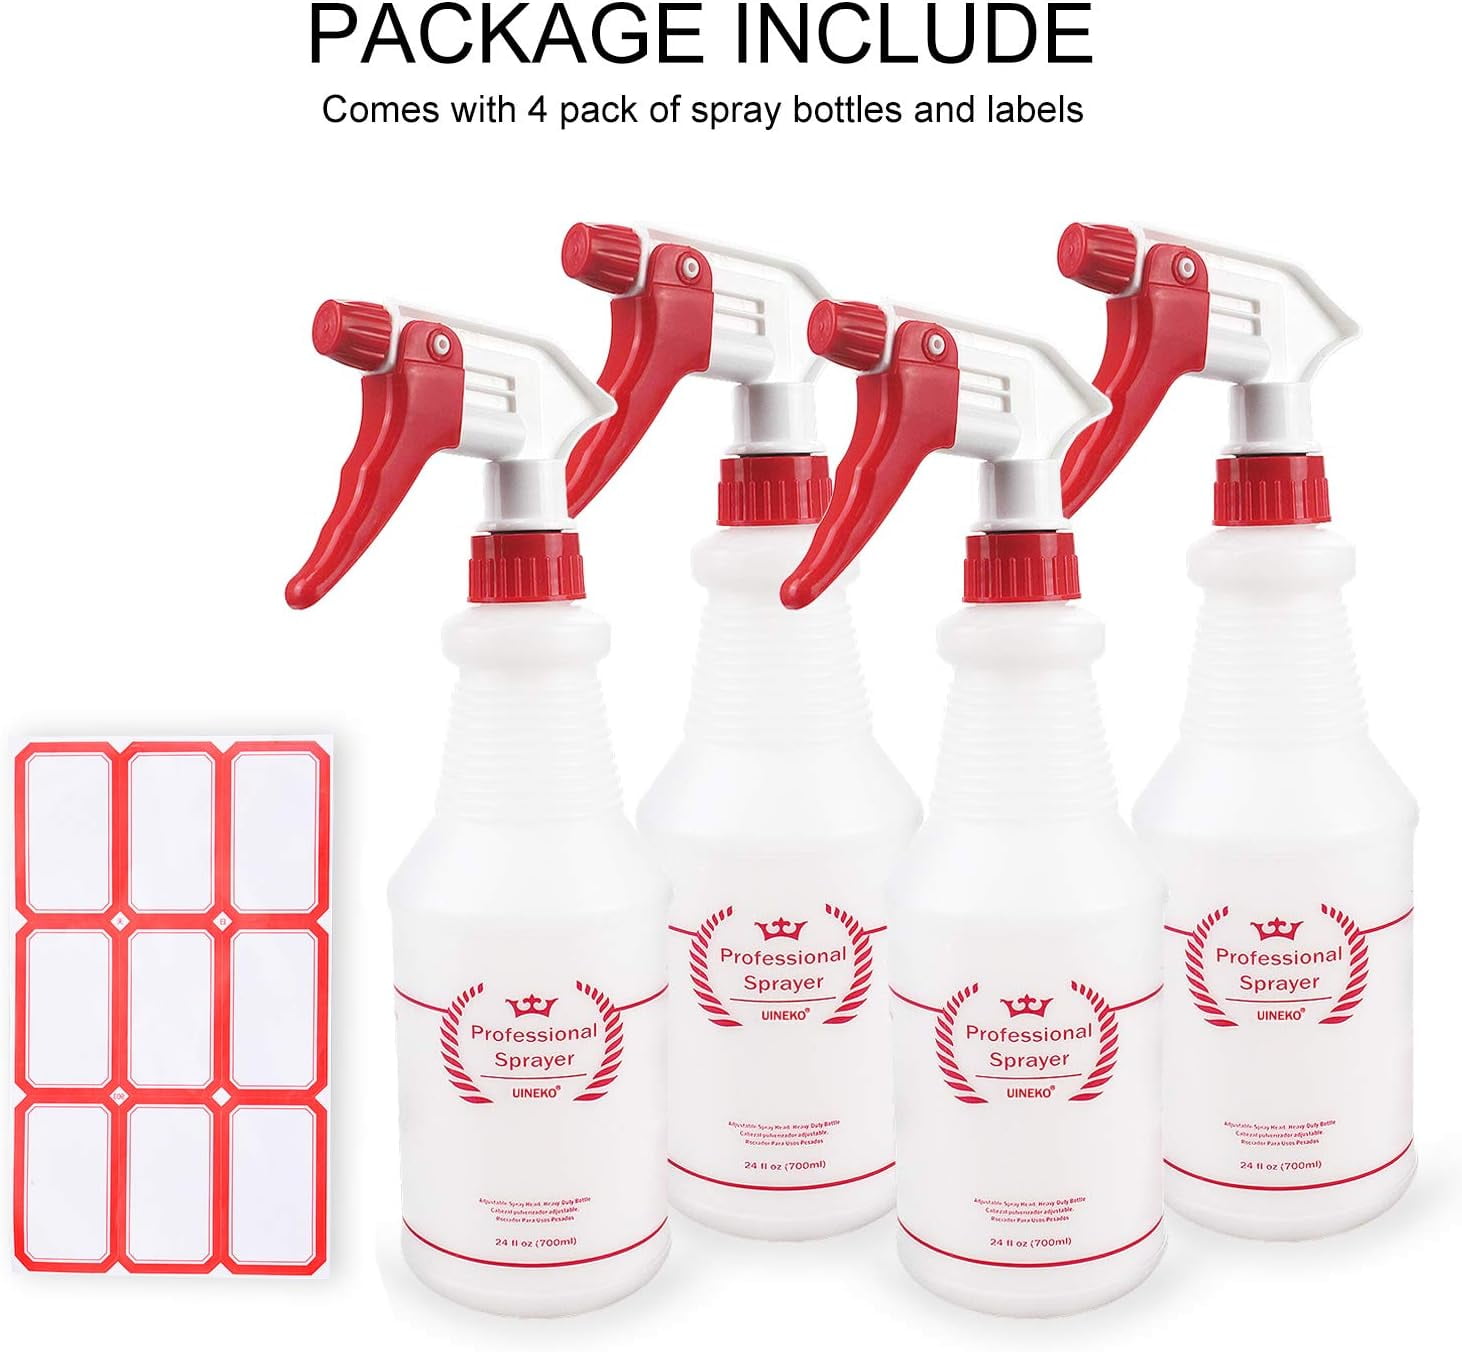 Veco Spray Bottle (5 Pack,16 oz) with Measurements and Adjustable Nozzle(Mist & Stream Mode), HDPE Plastic Spray Bottles for Cleaning Solution